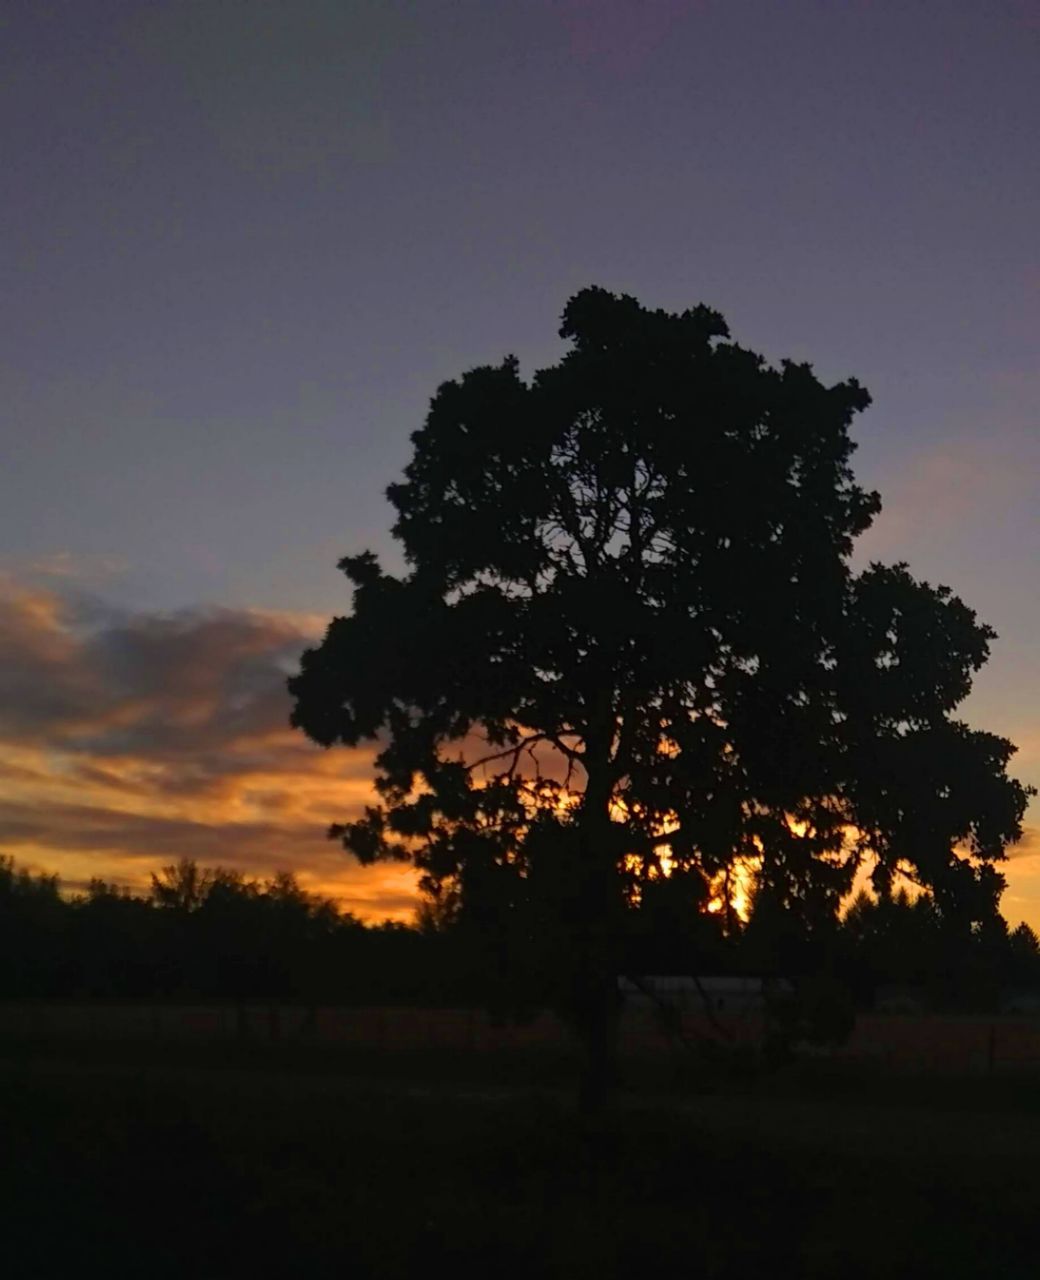 sky, plant, tree, silhouette, sunset, beauty in nature, tranquil scene, scenics - nature, tranquility, nature, field, landscape, no people, environment, land, growth, idyllic, cloud - sky, non-urban scene, outdoors